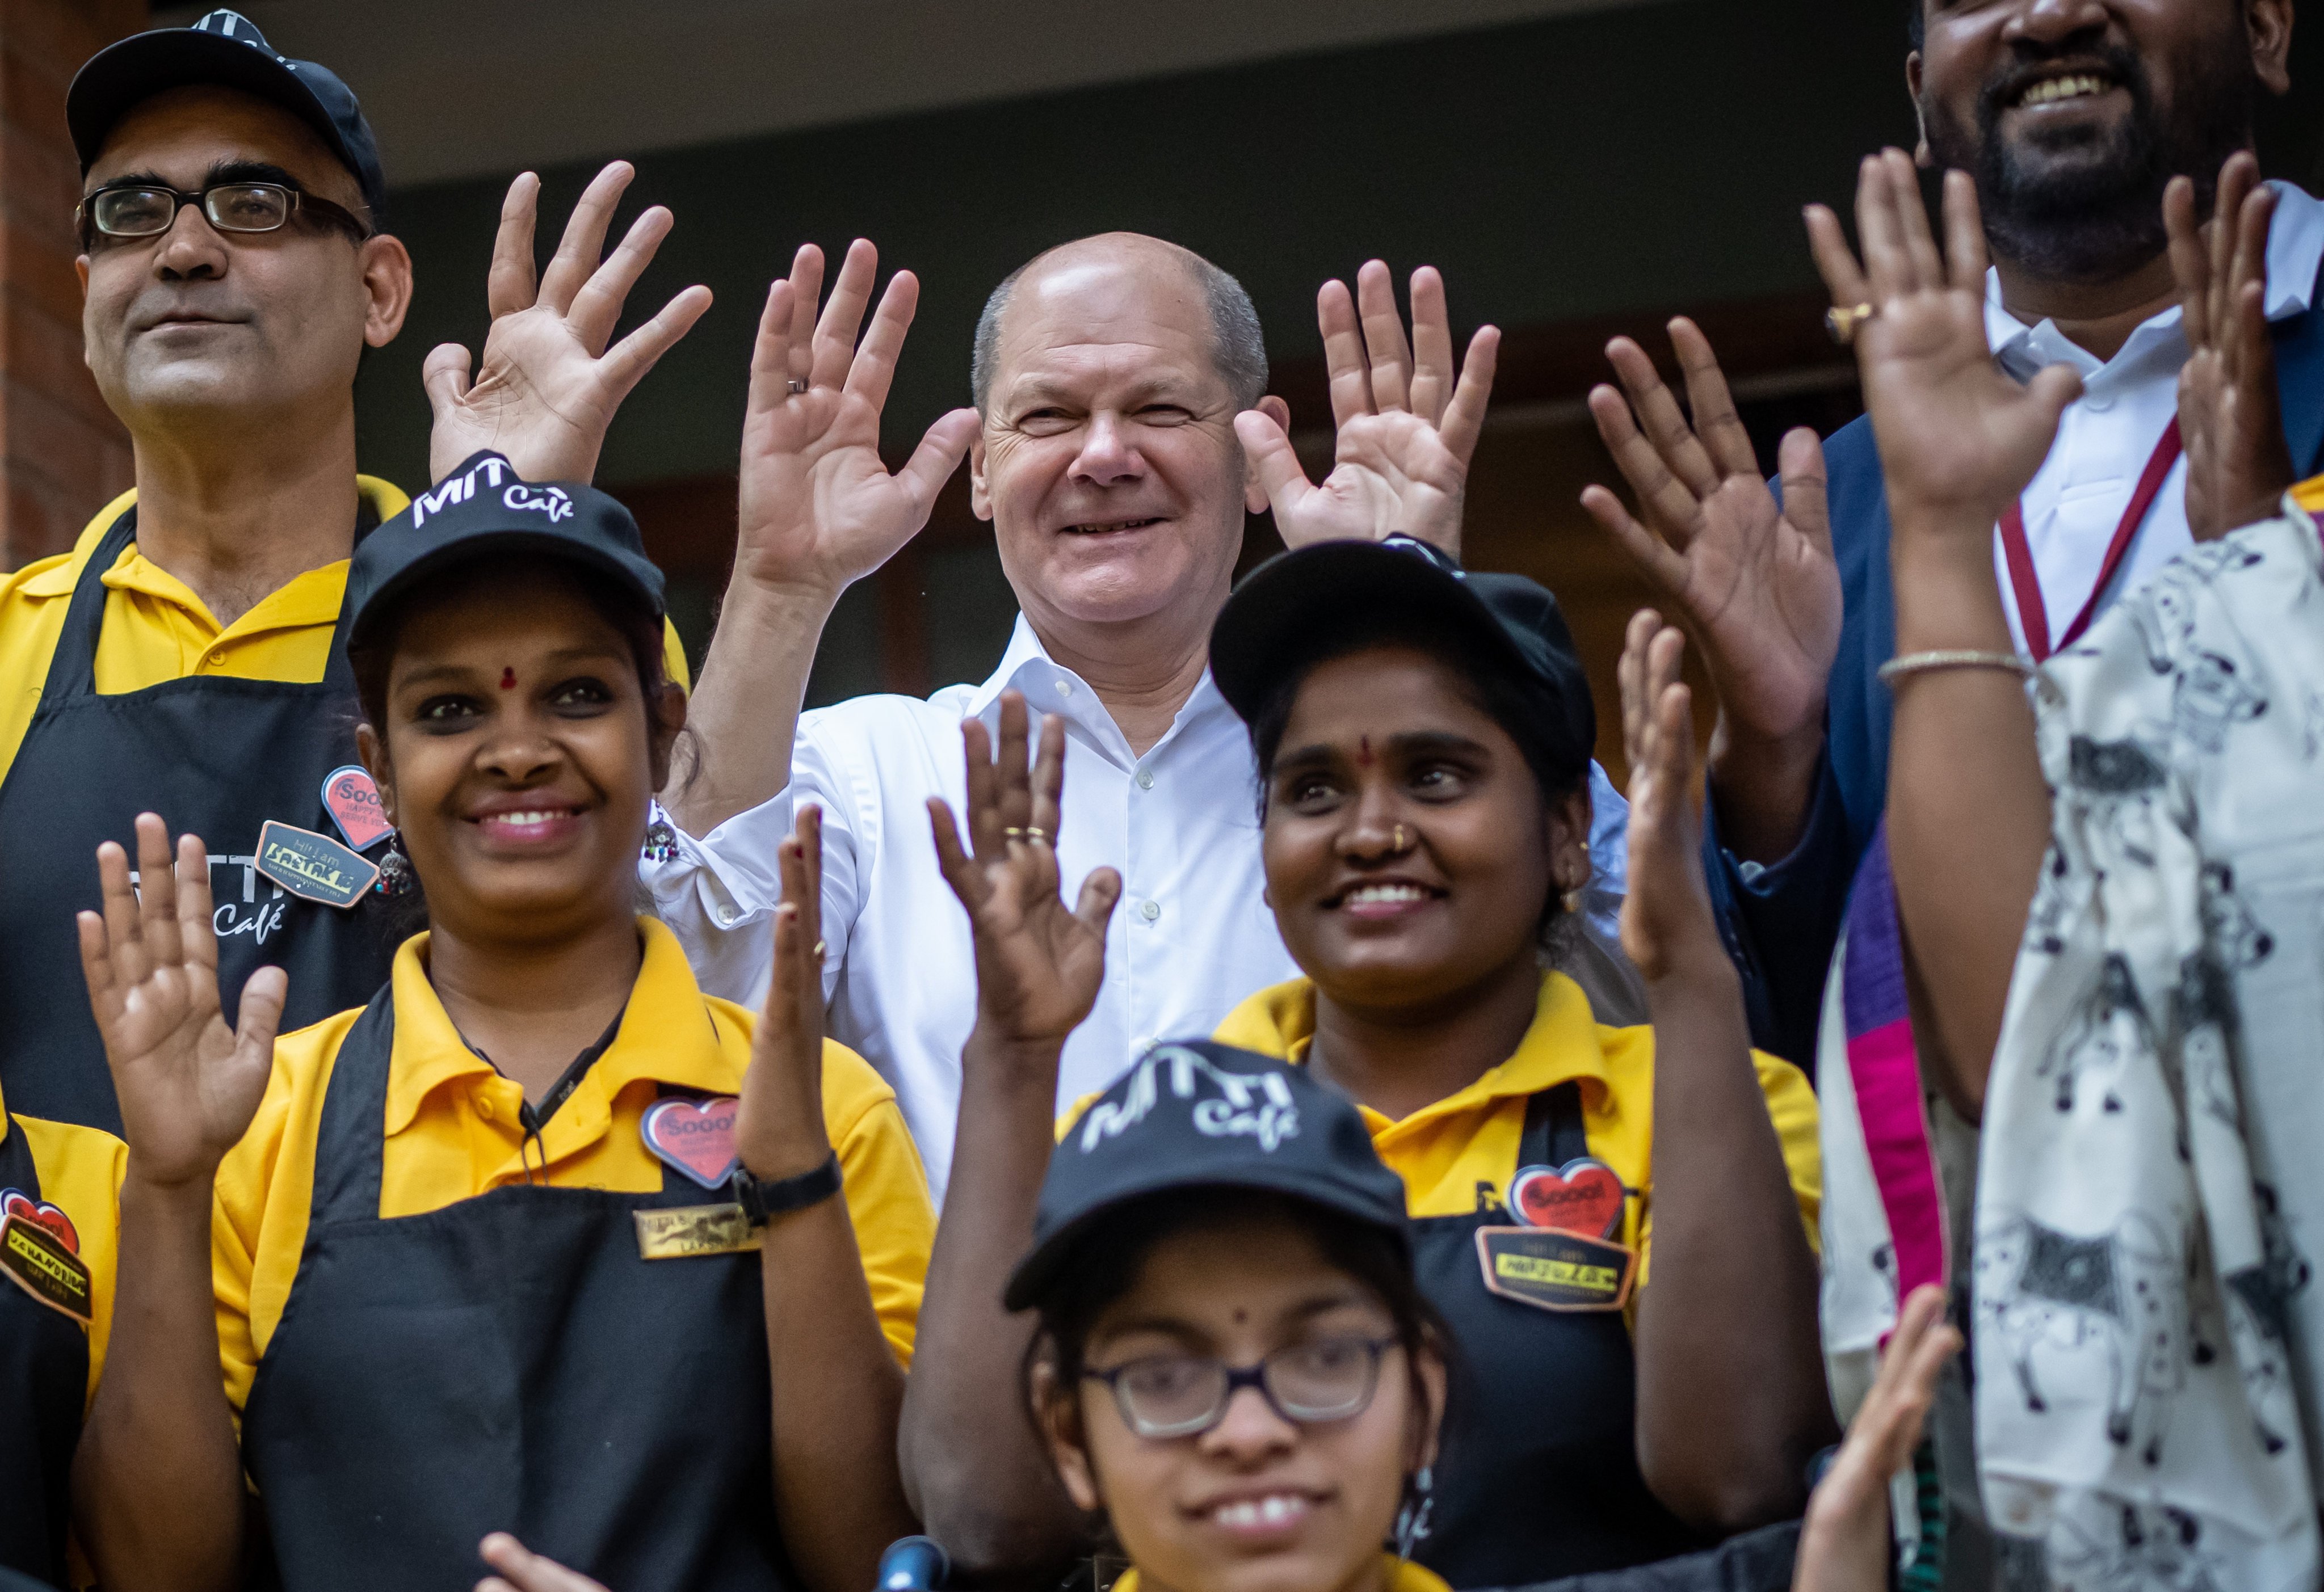 German Chancellor Olaf Scholz, centre, poses for a picture with employees of the Mitti Cafe in Begaluru, India on Sunday. Photo: dpa